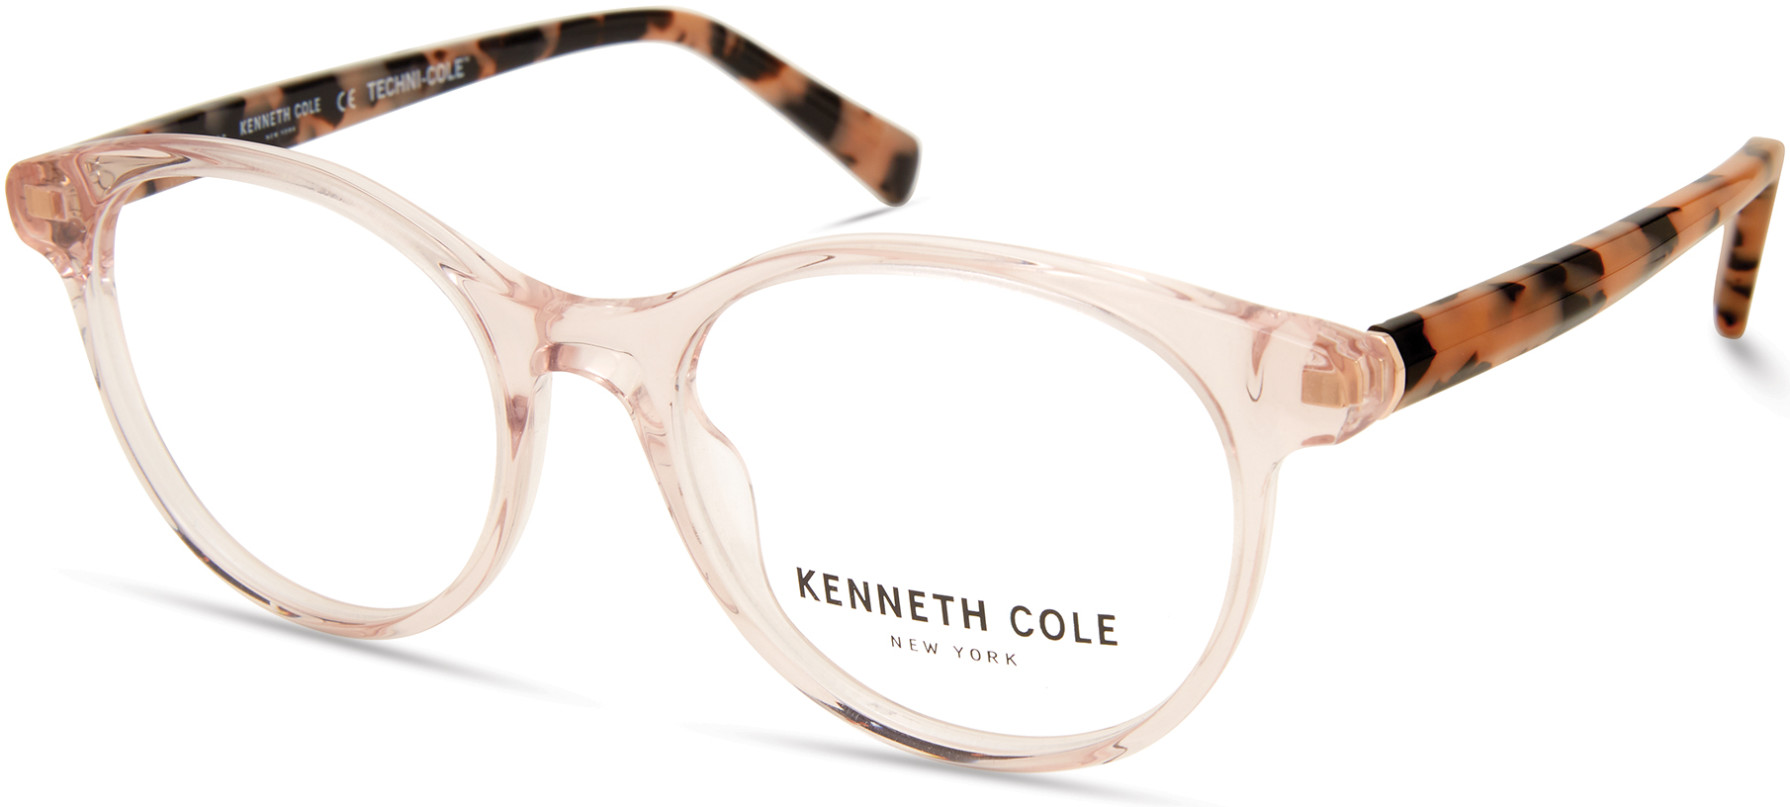 KENNETH COLE NY 0325 072